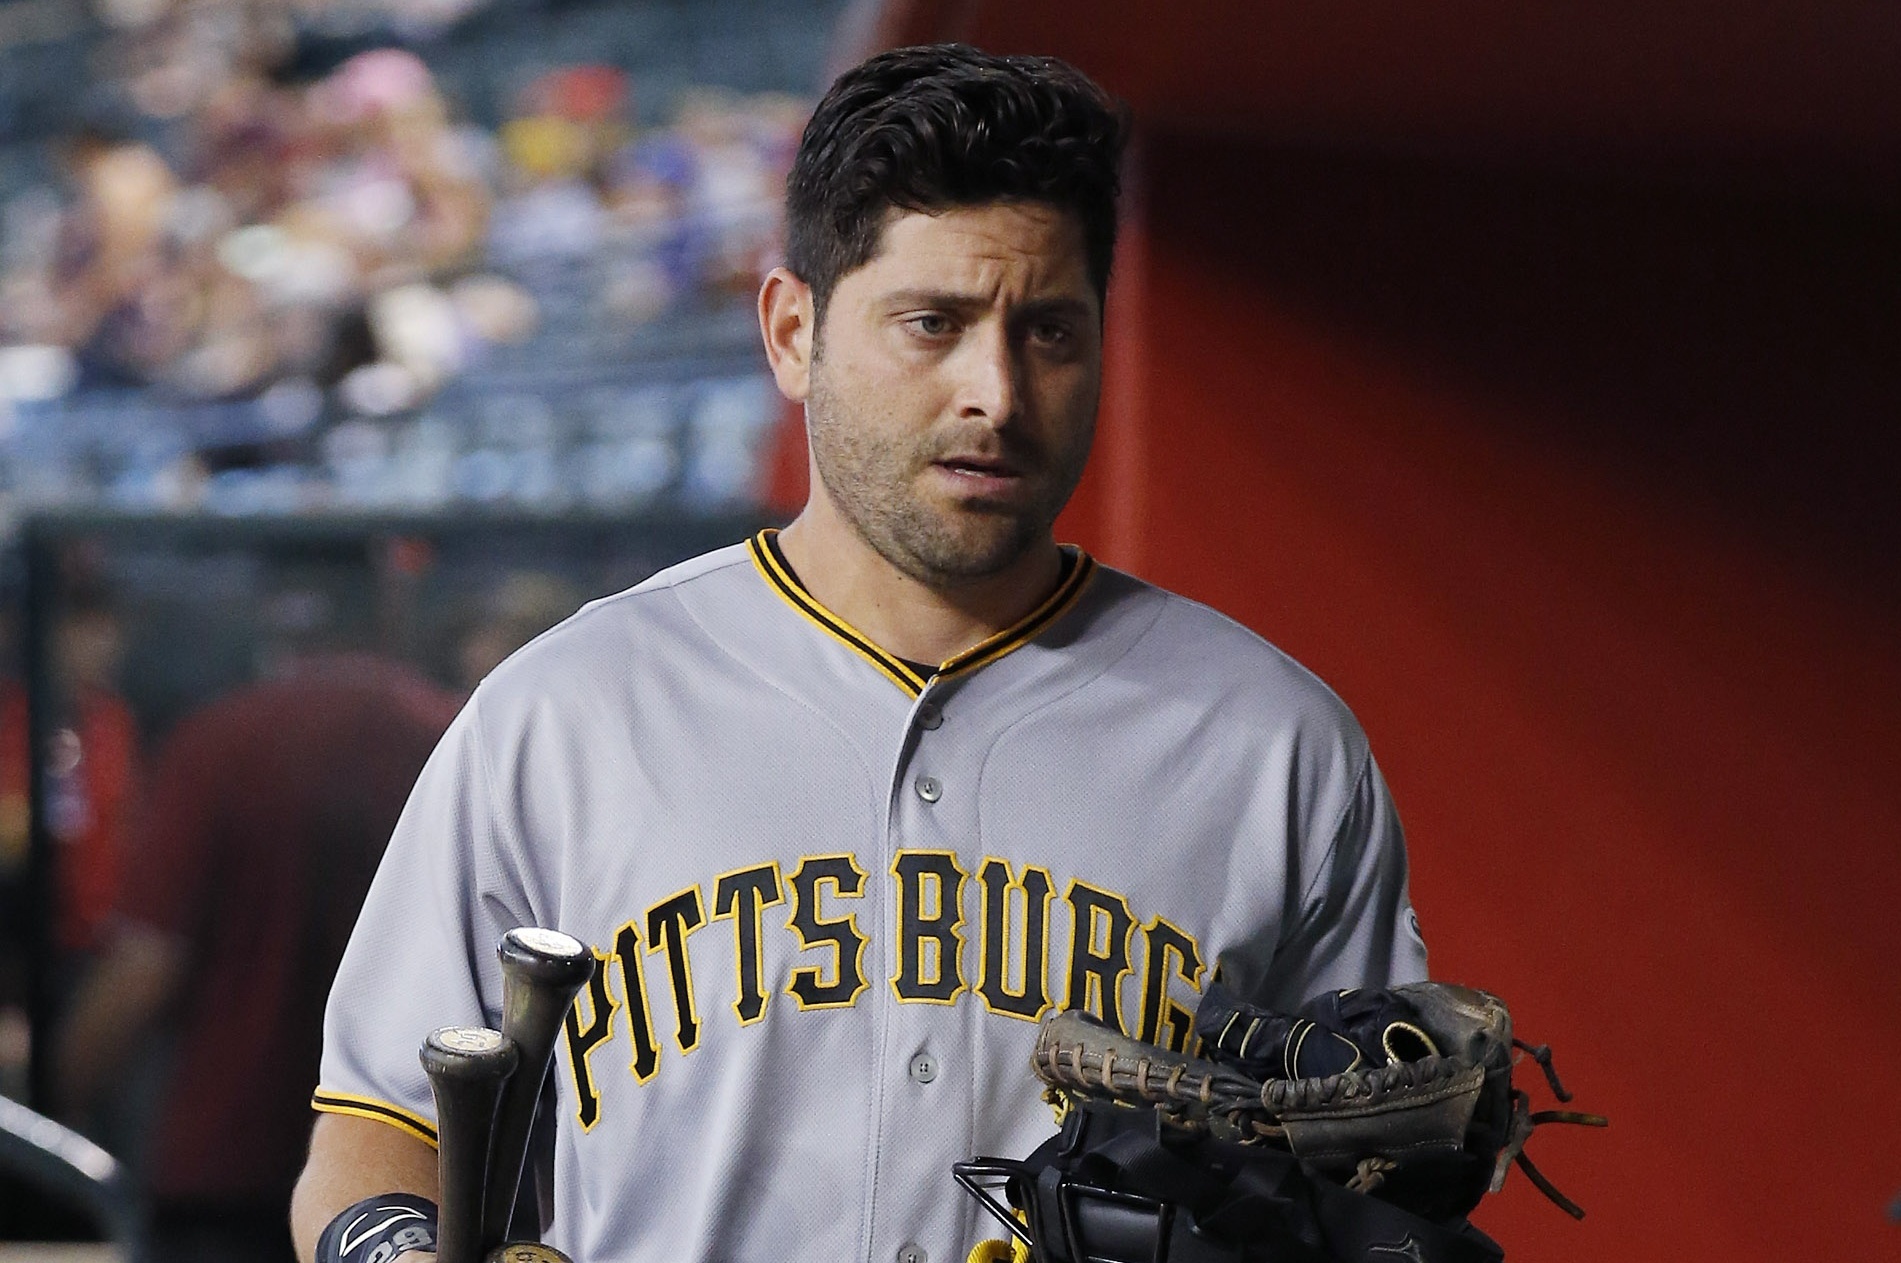 Francisco Cervelli of the Pittsburgh Pirates plays first base during